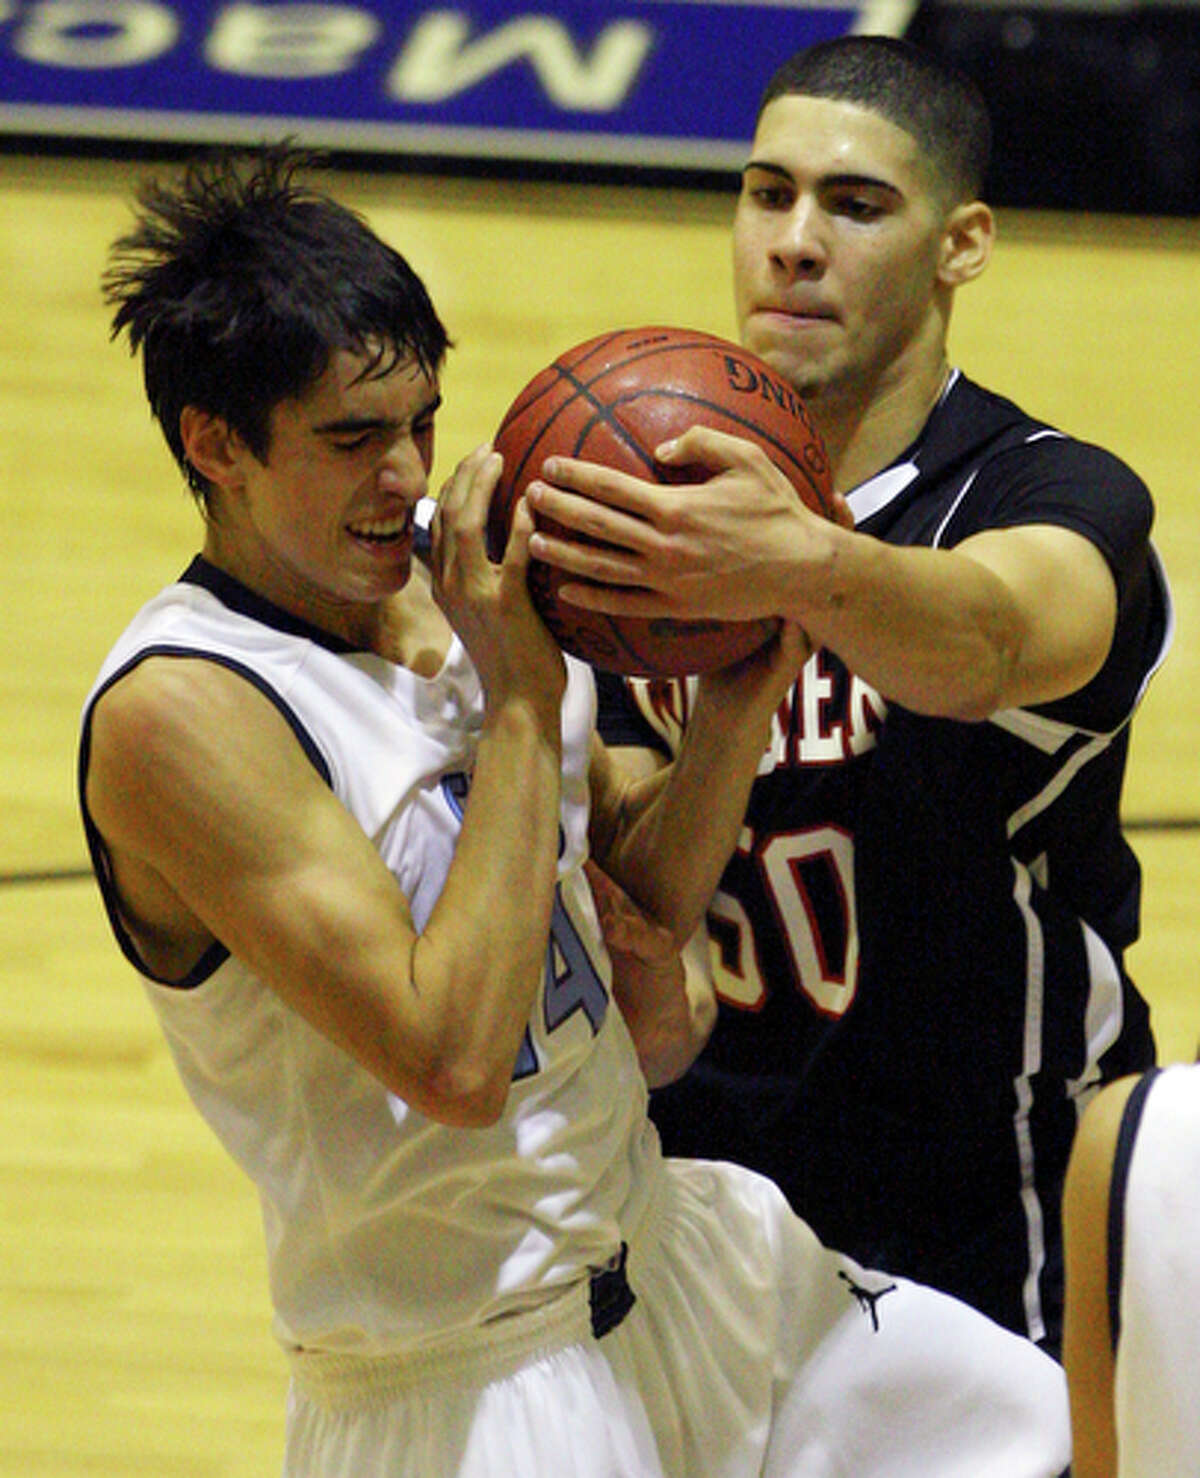 Johnson's Joey Louwagie and Wagner's Jose Negron struggle for control of the ball.